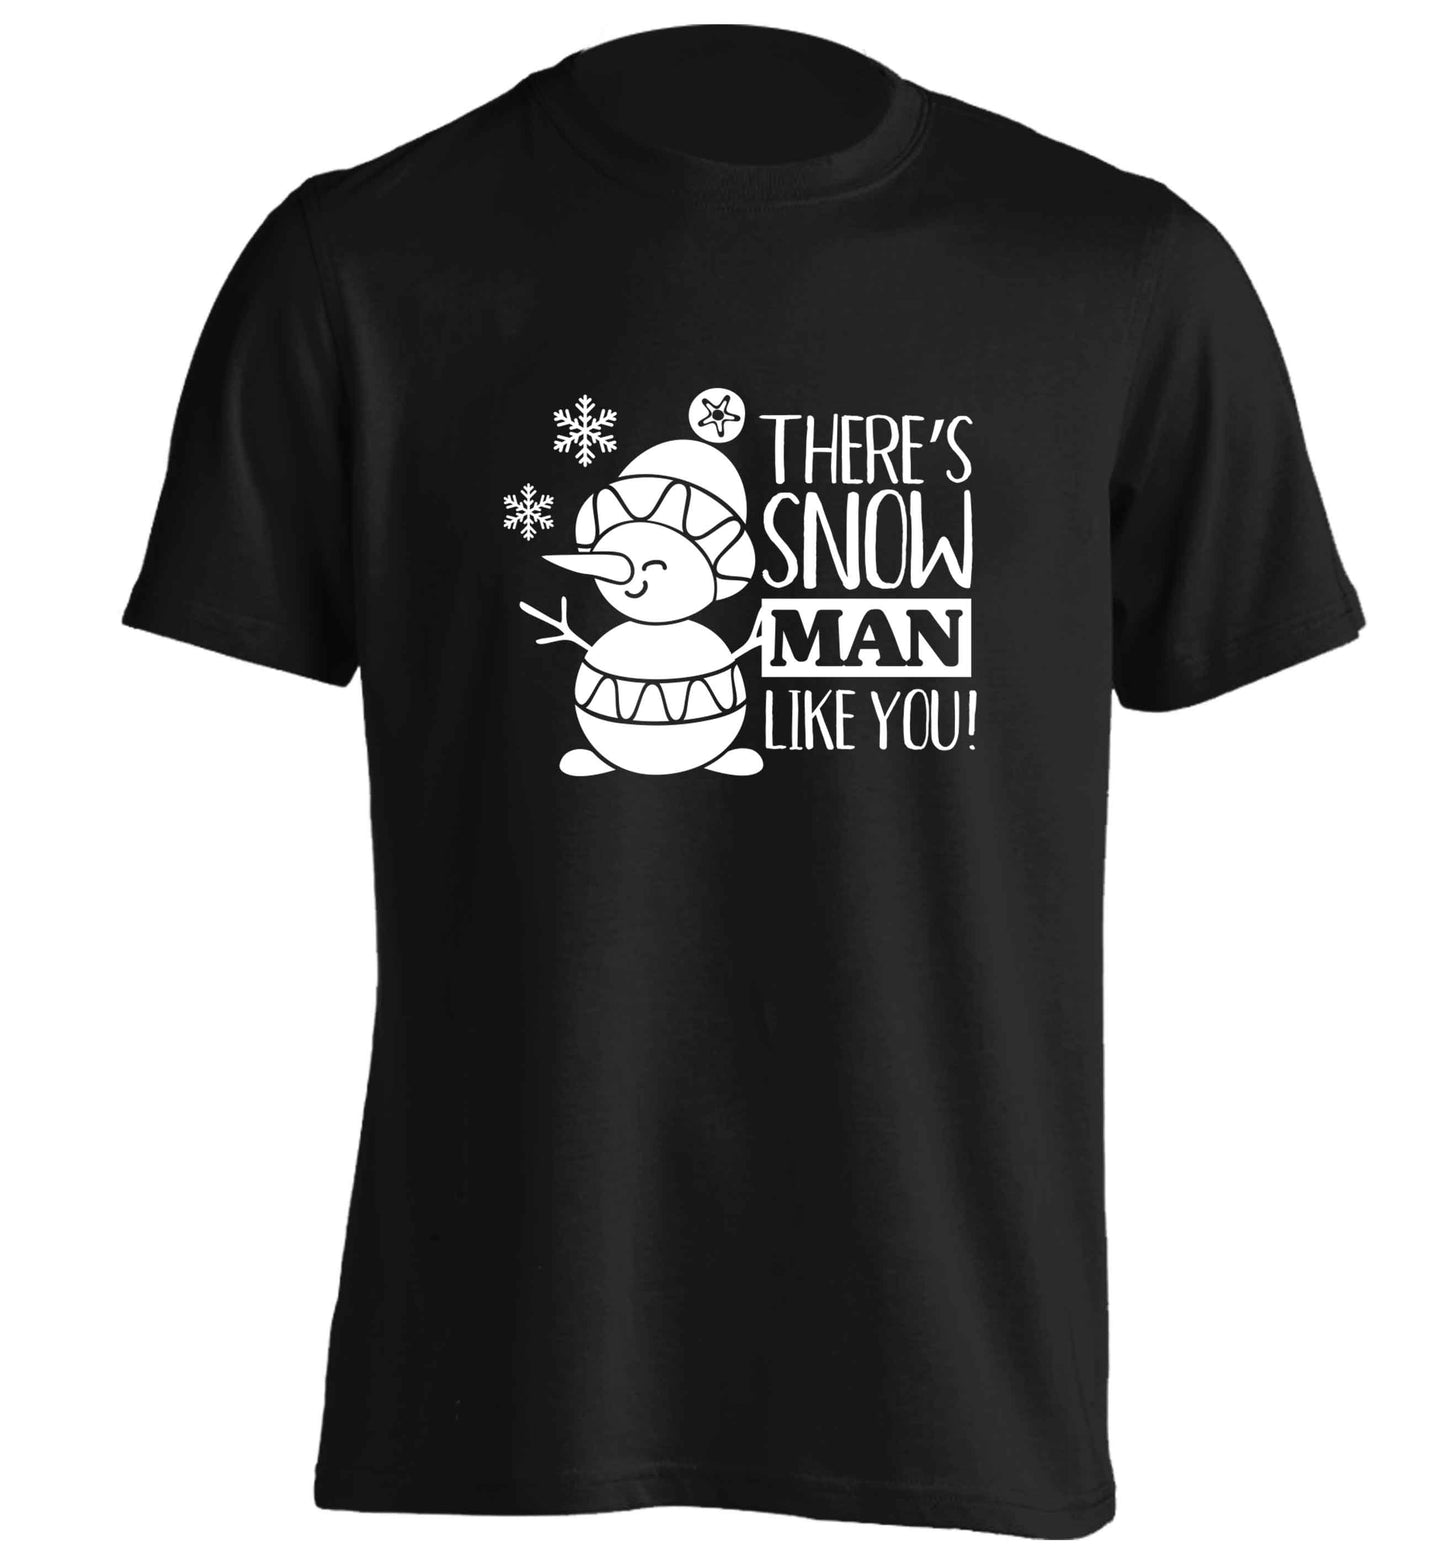 There's snow man like you adults unisex black Tshirt 2XL